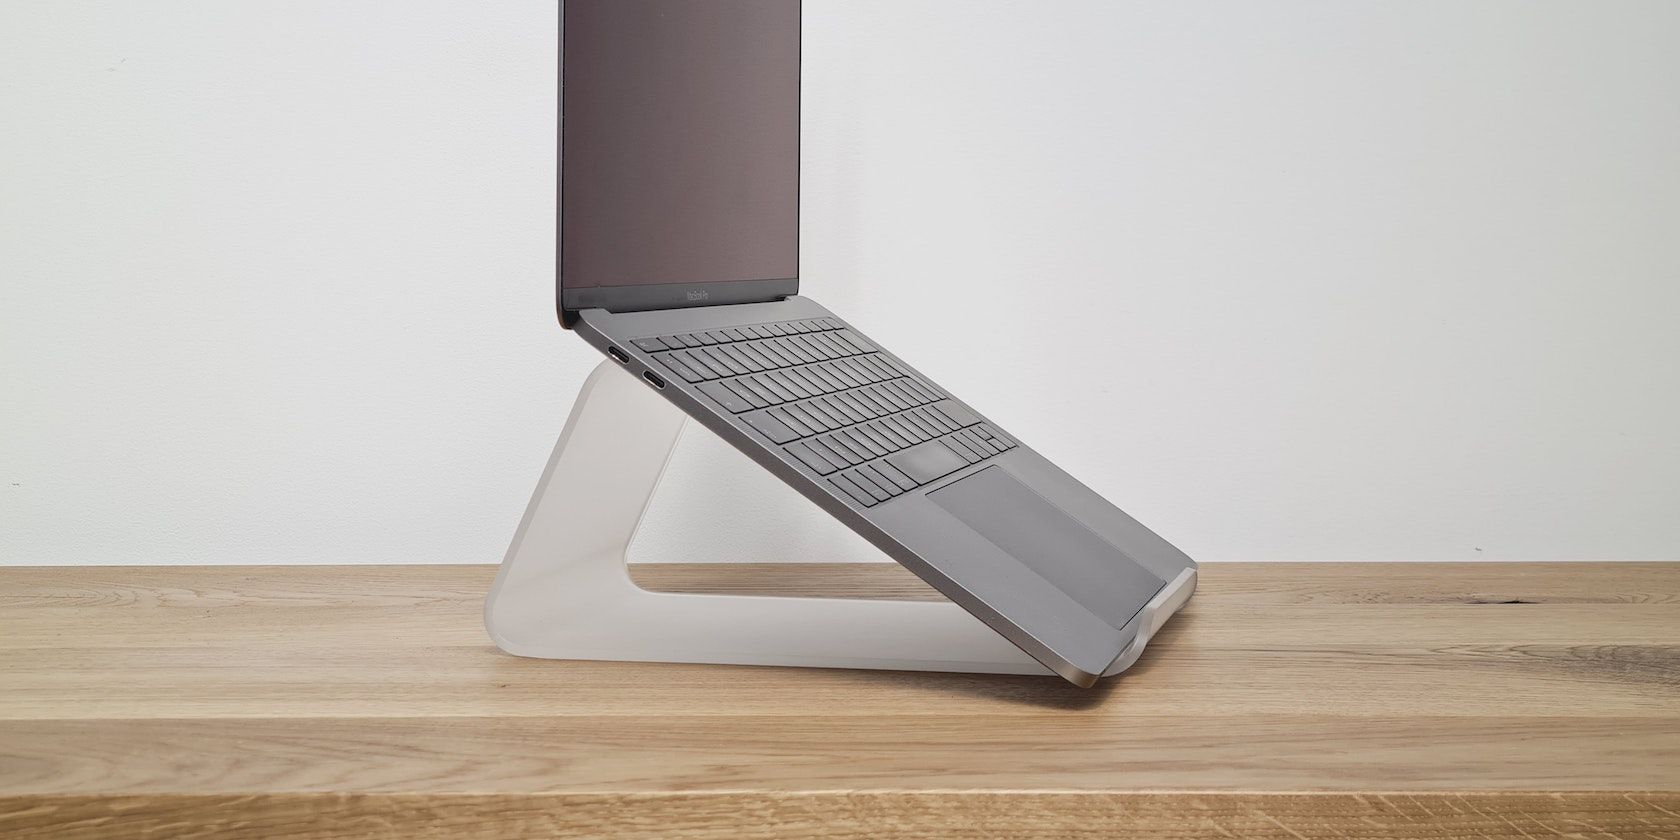 MacBook on a small triangle stand on a table